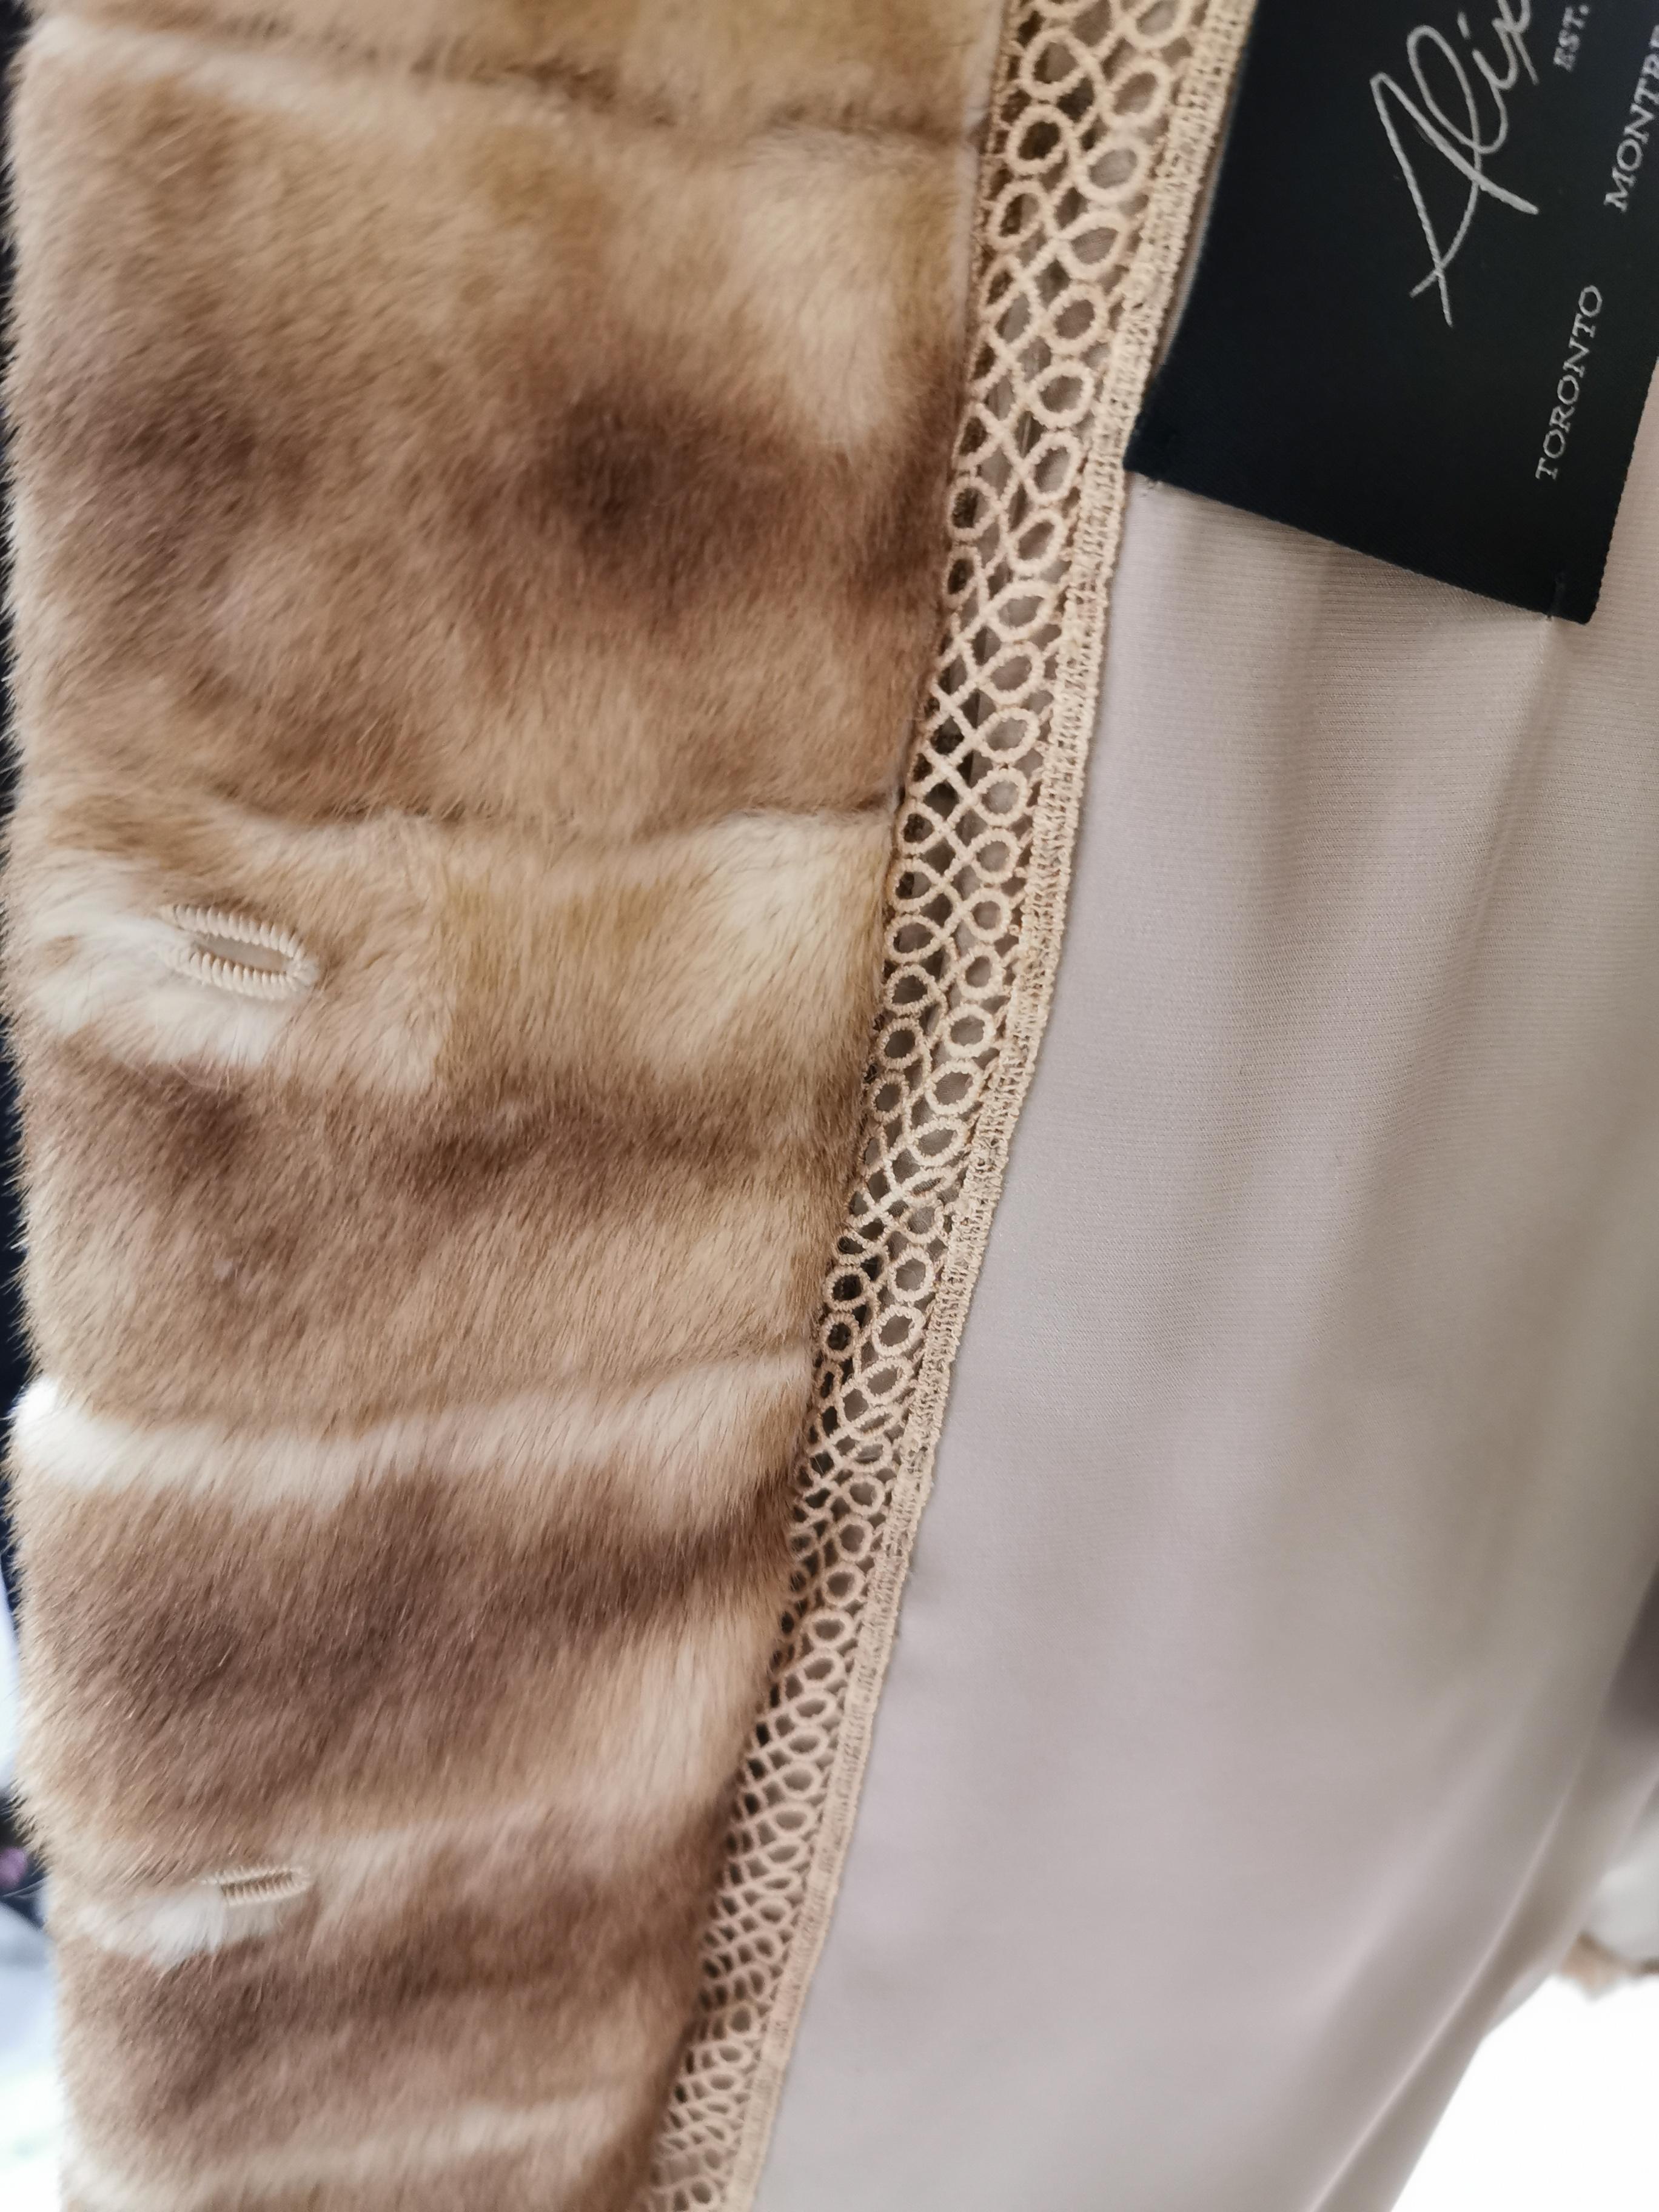 Brand New Dennis Basso Ermine Sable Fur Coat (Size 6-8/S) For Sale 2